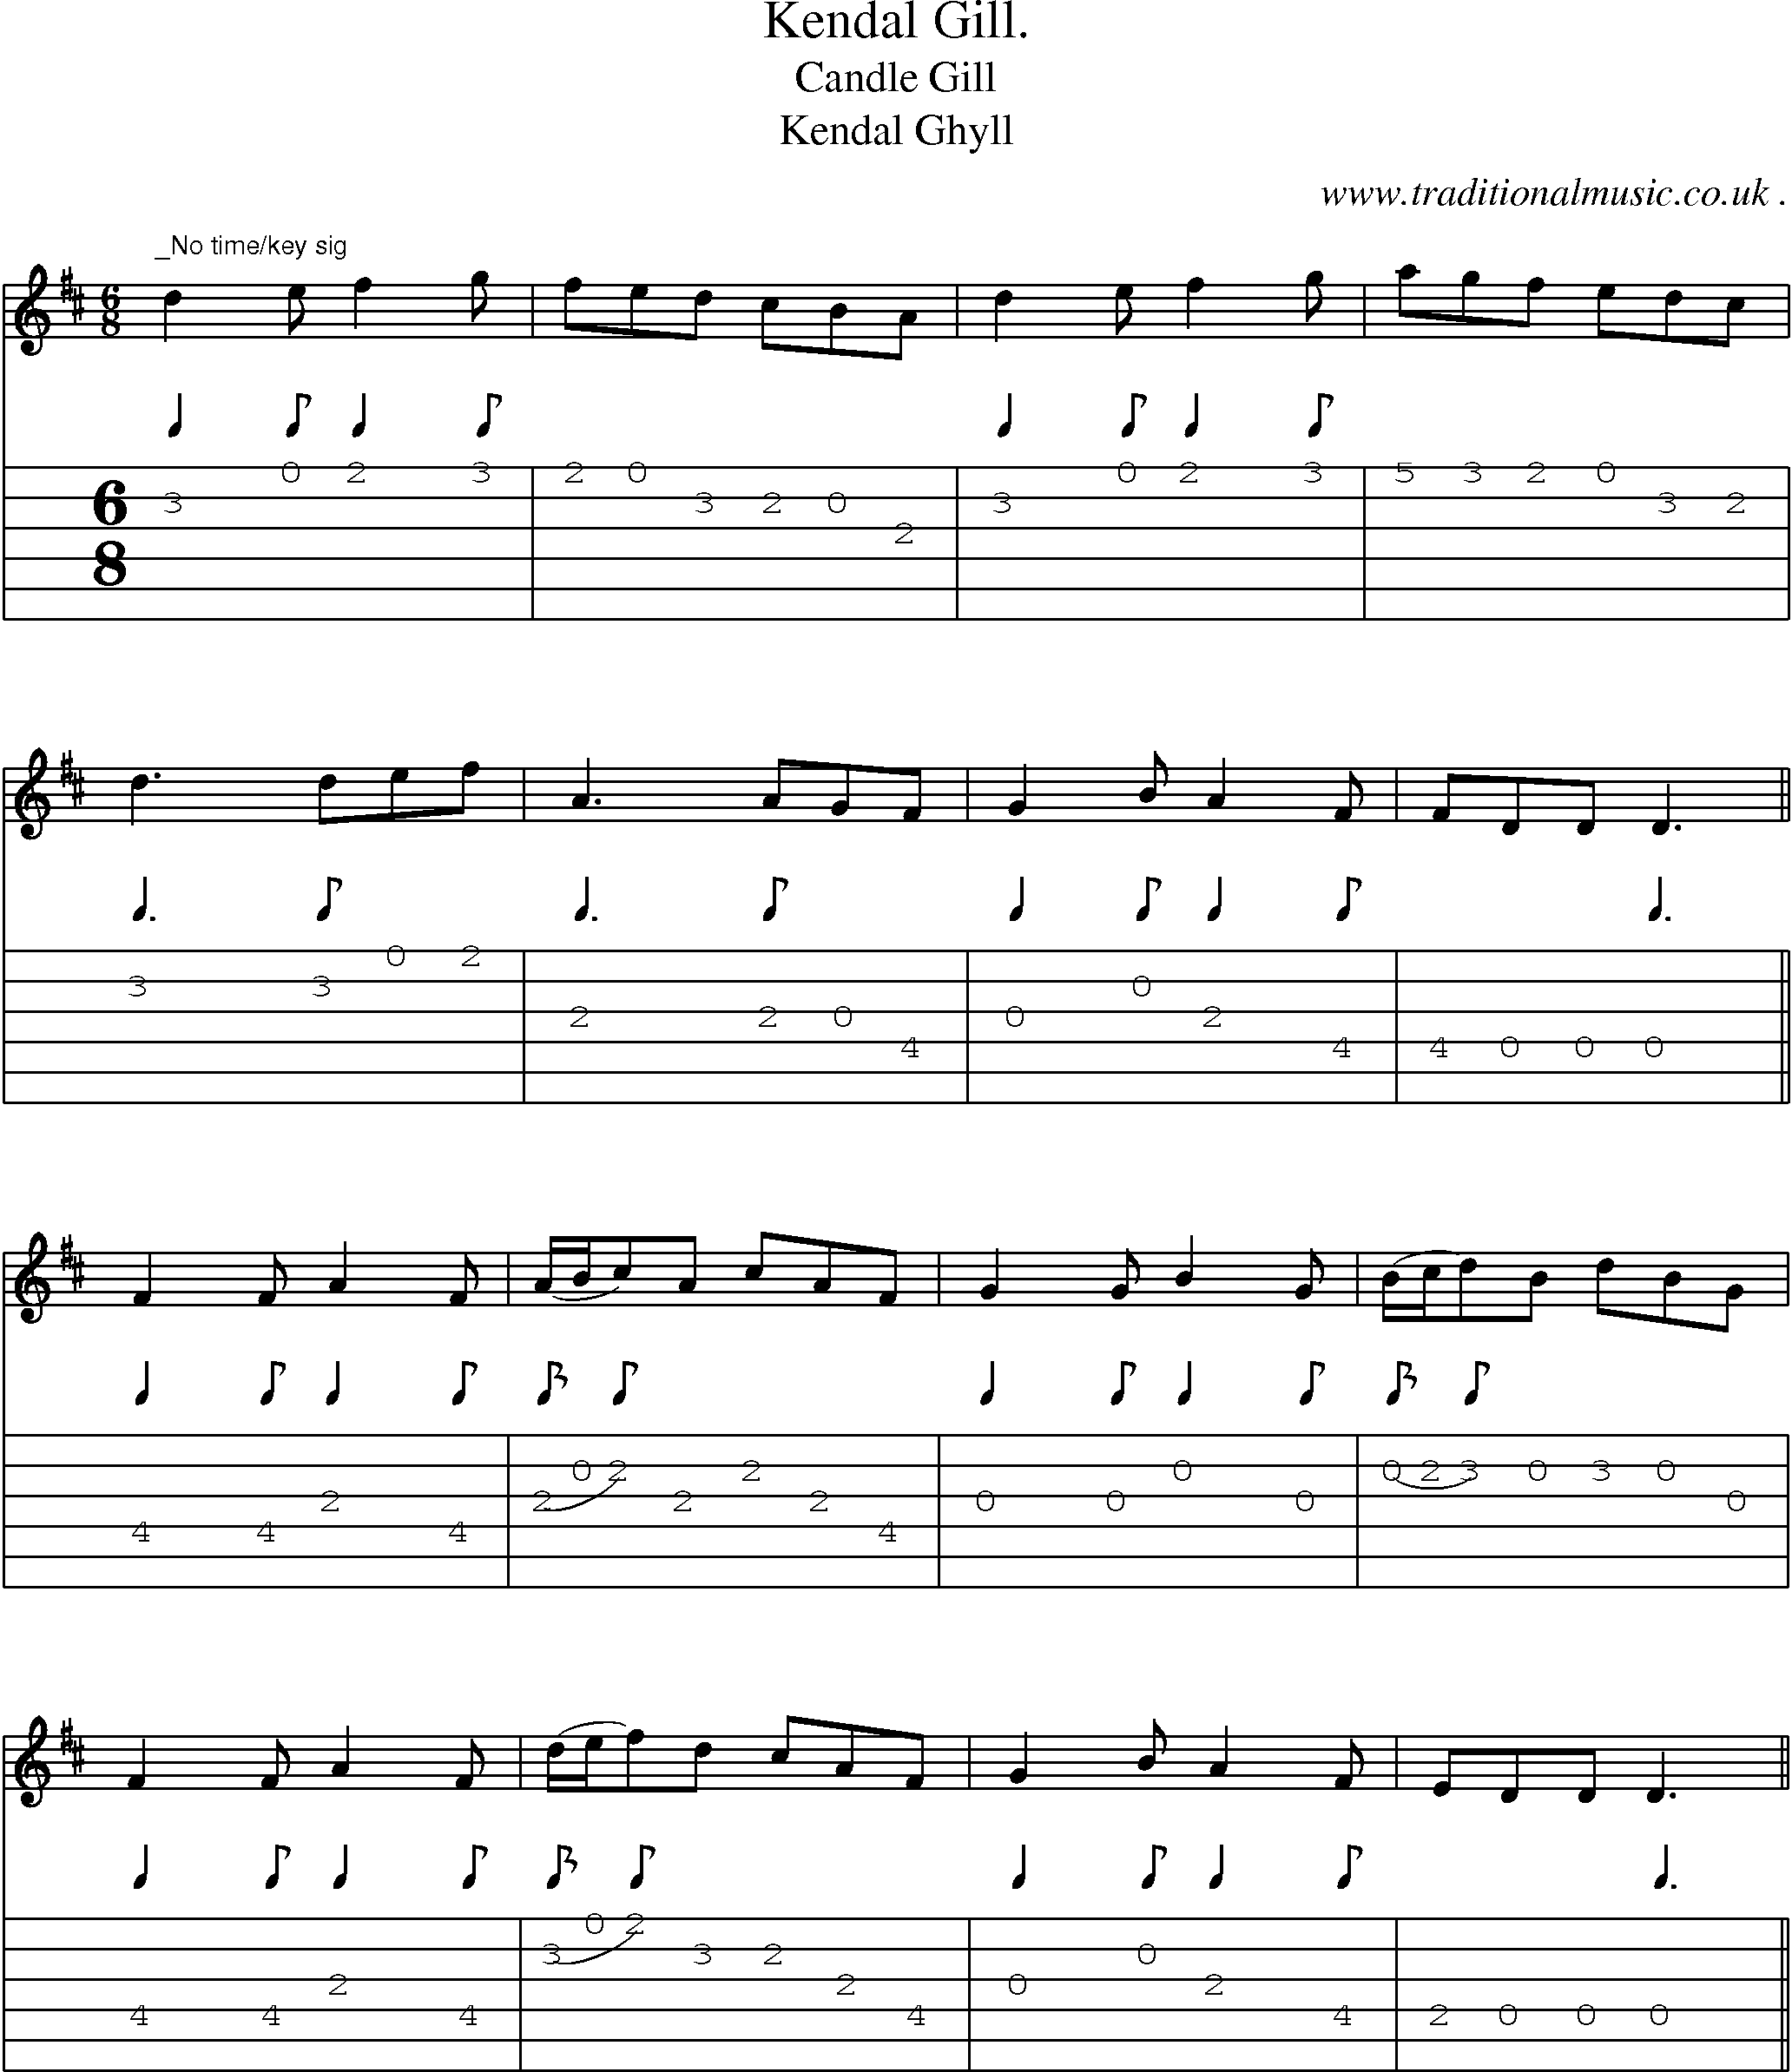 Sheet-Music and Guitar Tabs for Kendal Gill